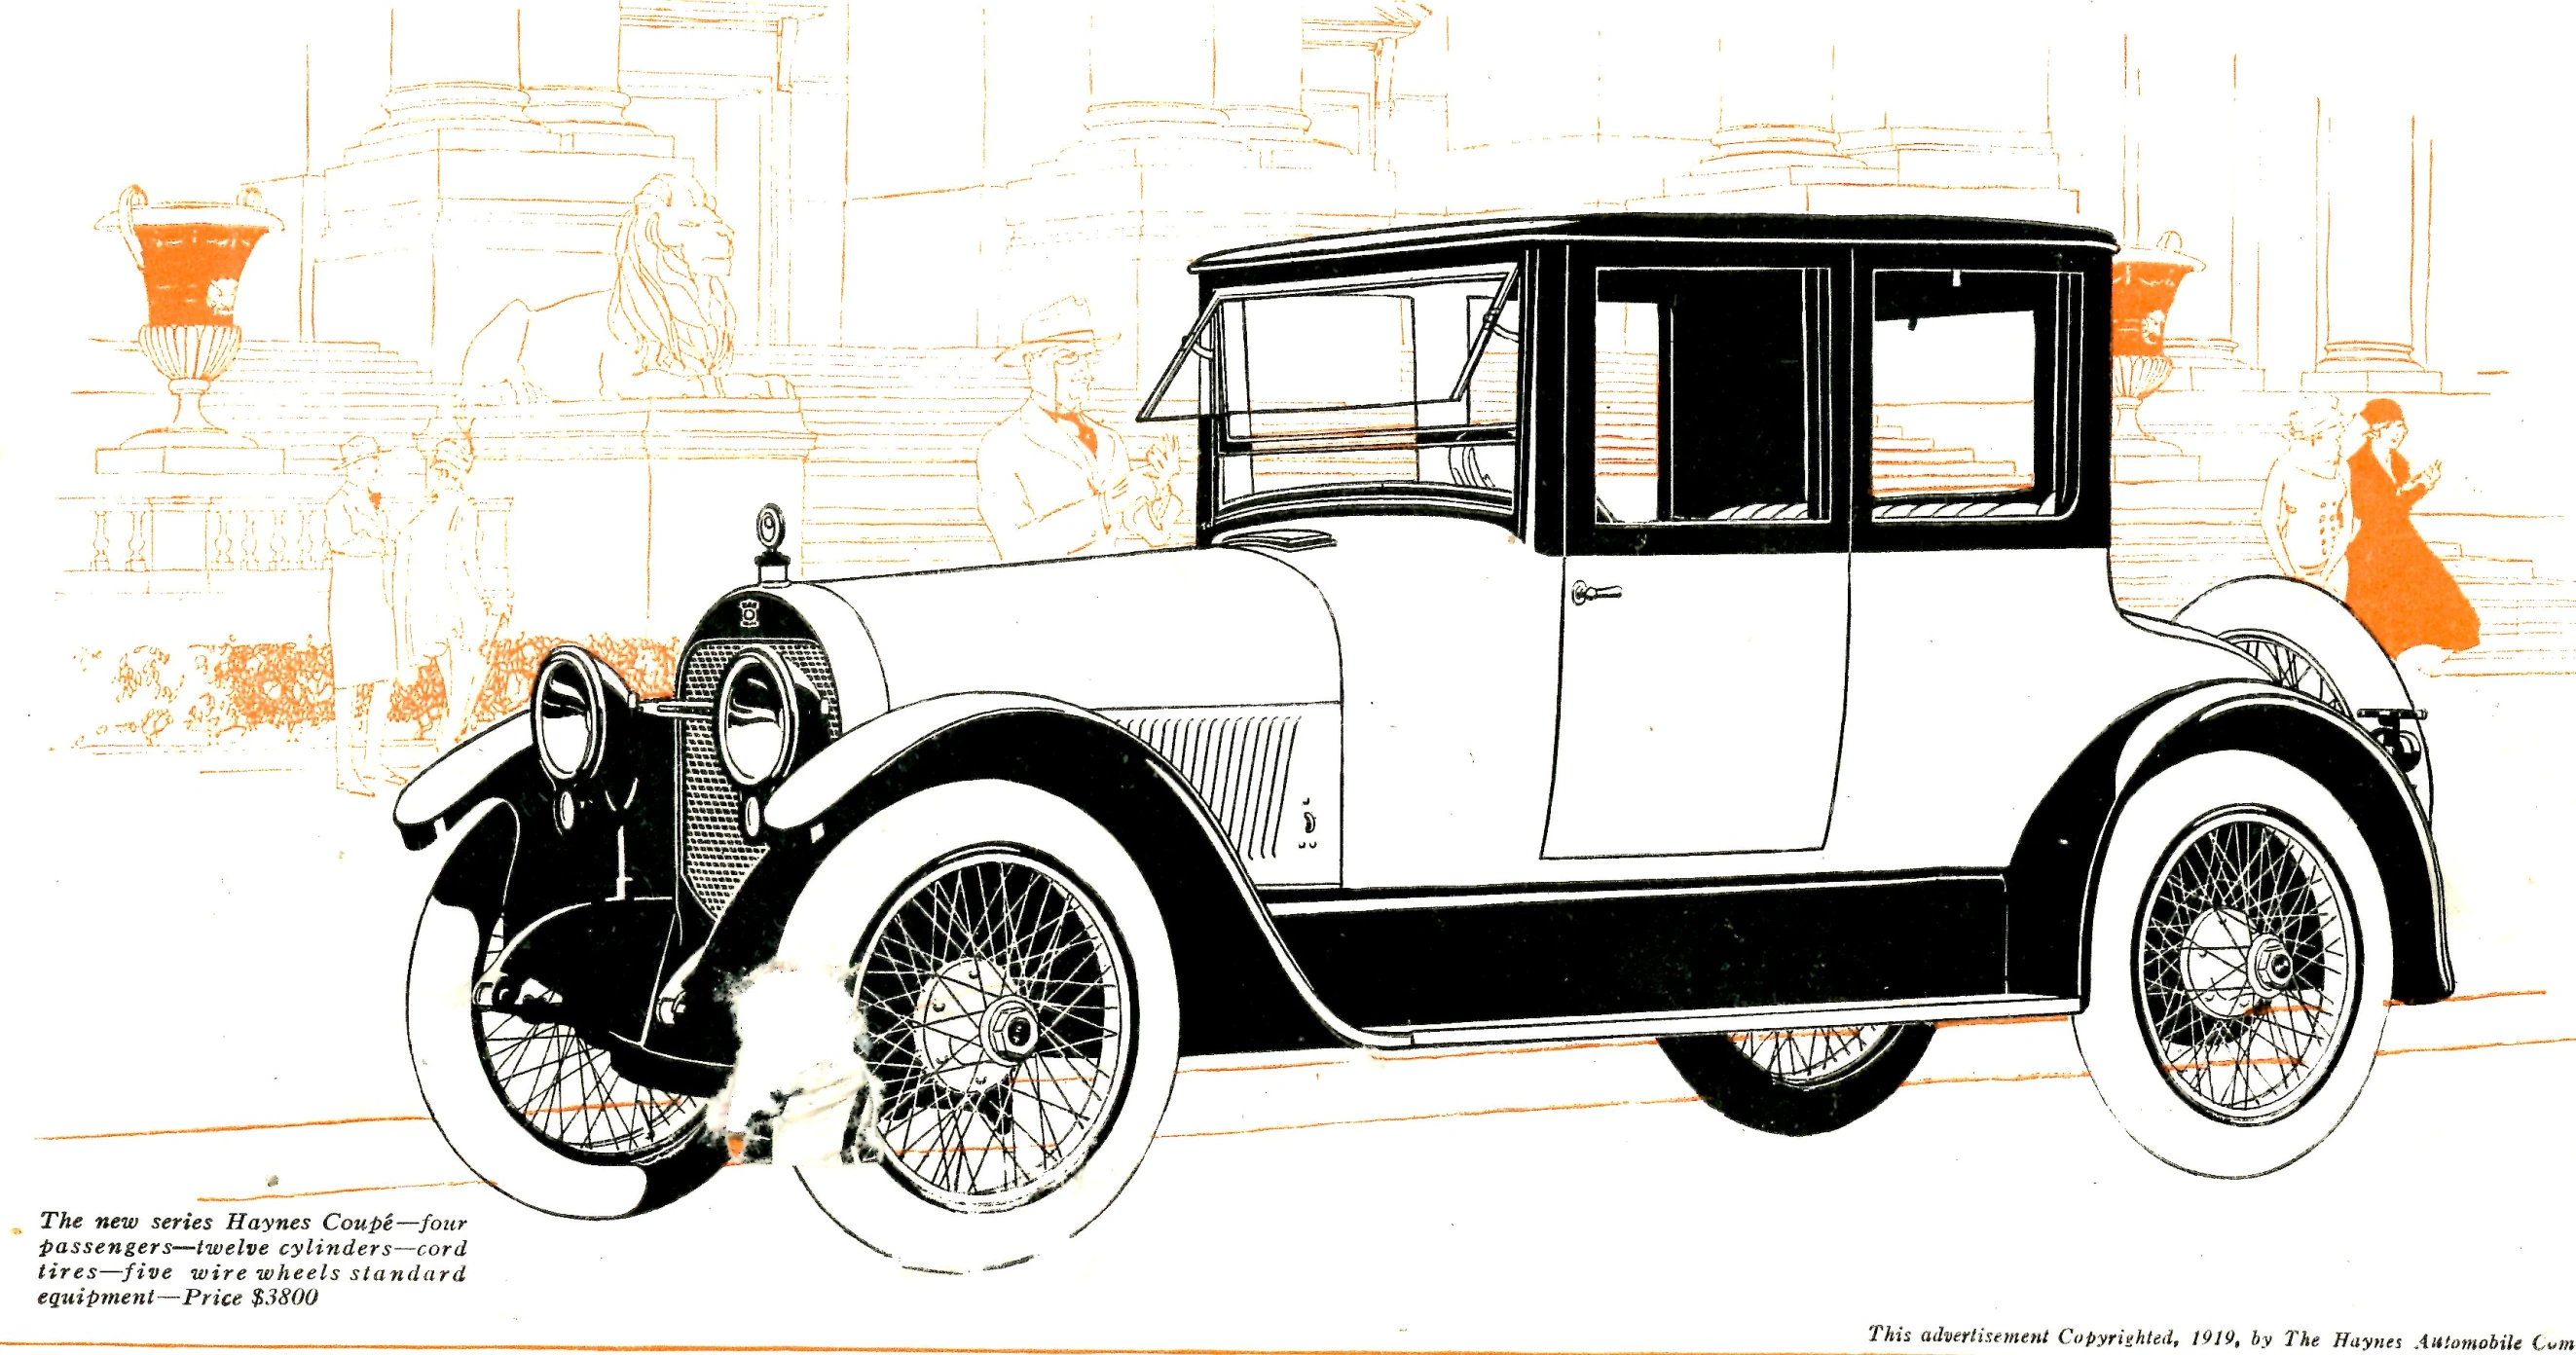 an old black and white drawing of an older model car